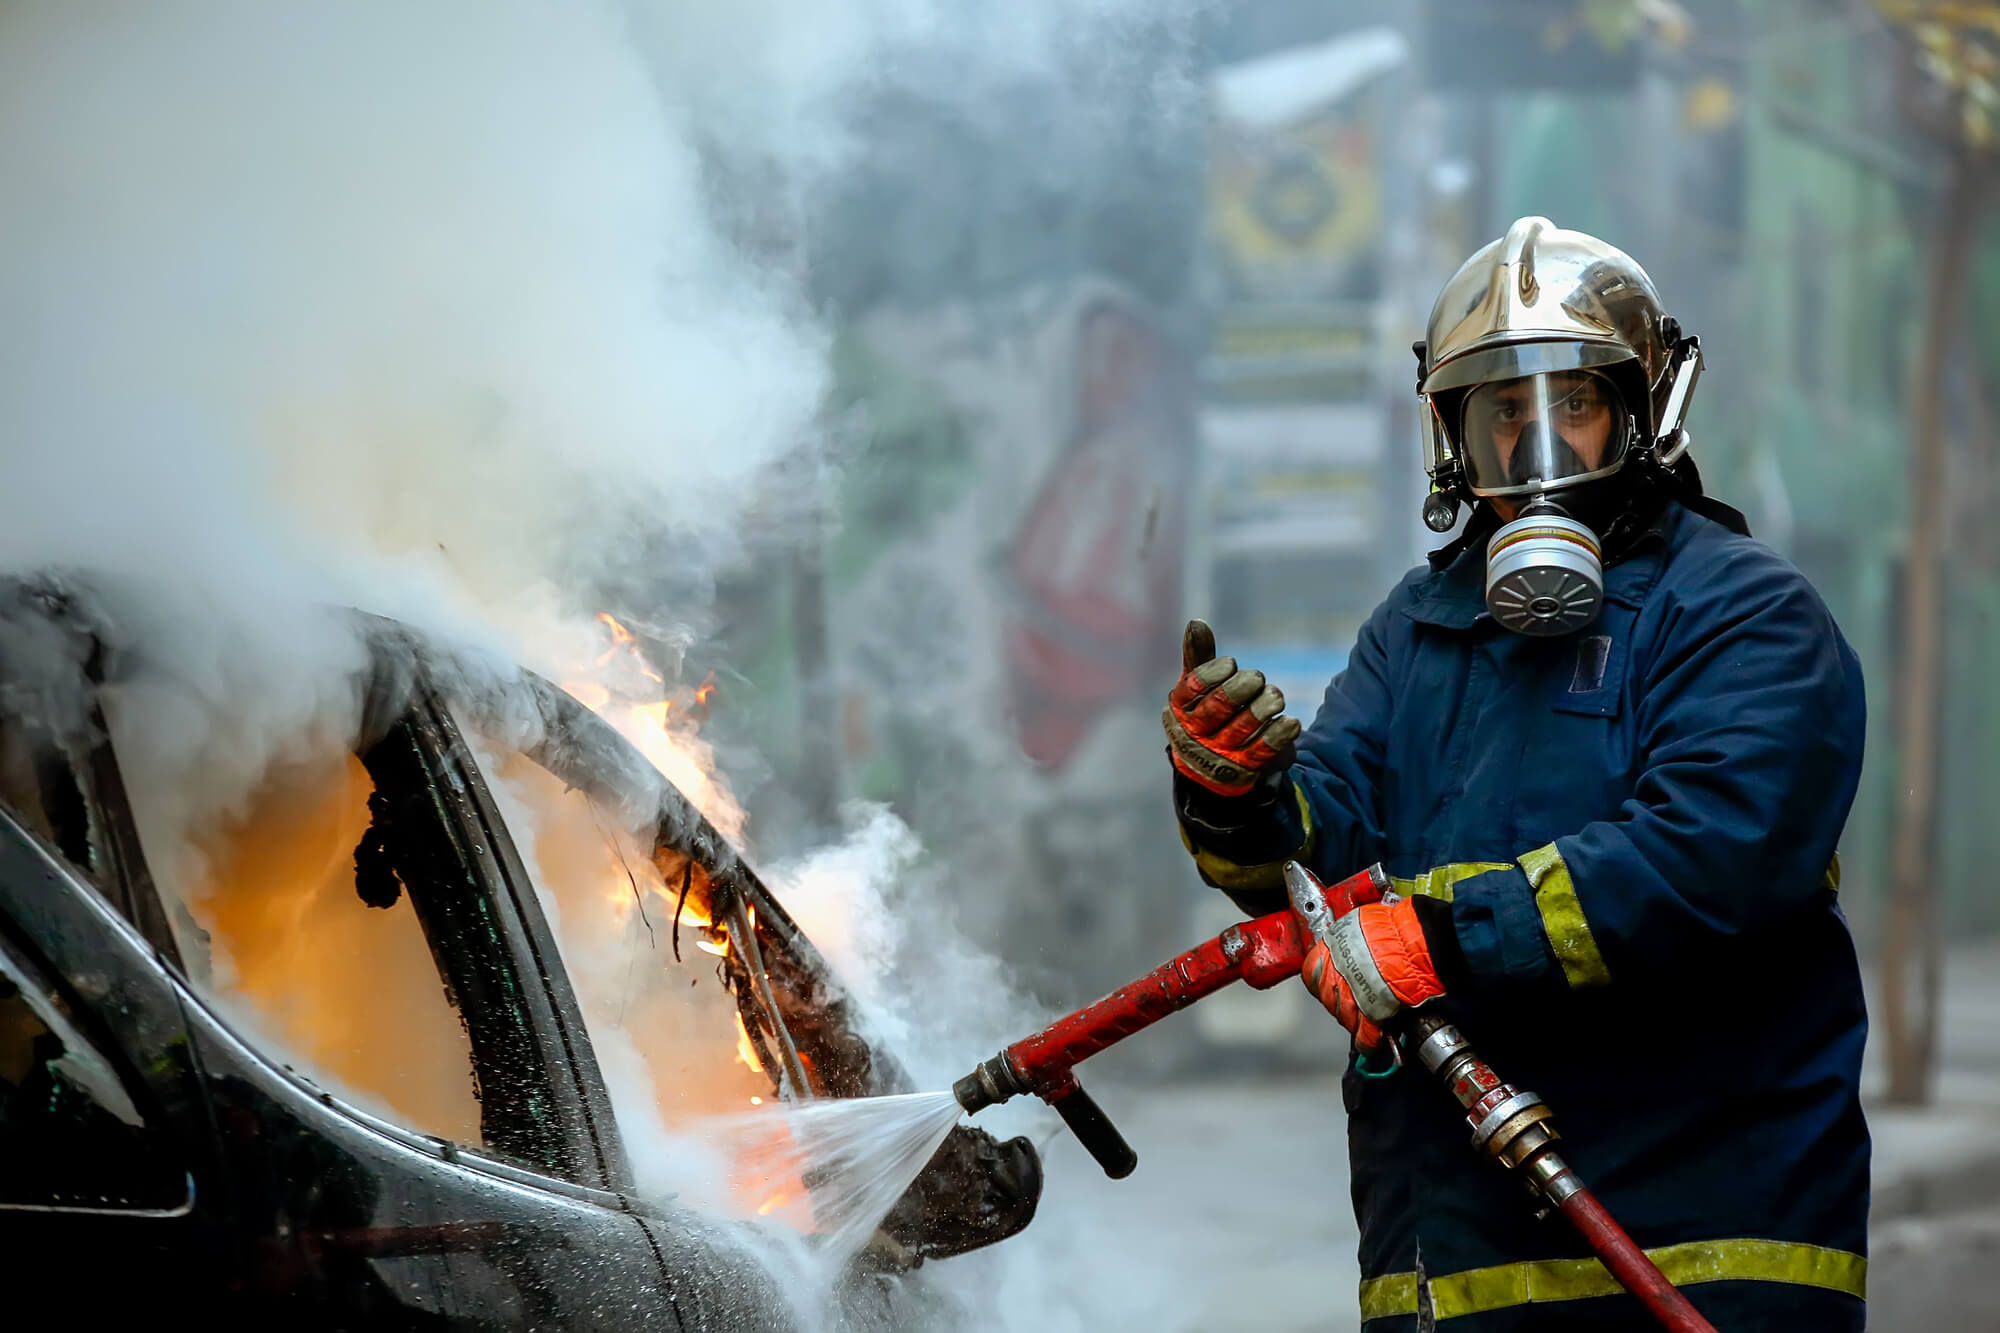 Athens, Greece - February 4, 2016: Firemen fighting a flaming car after an explosion